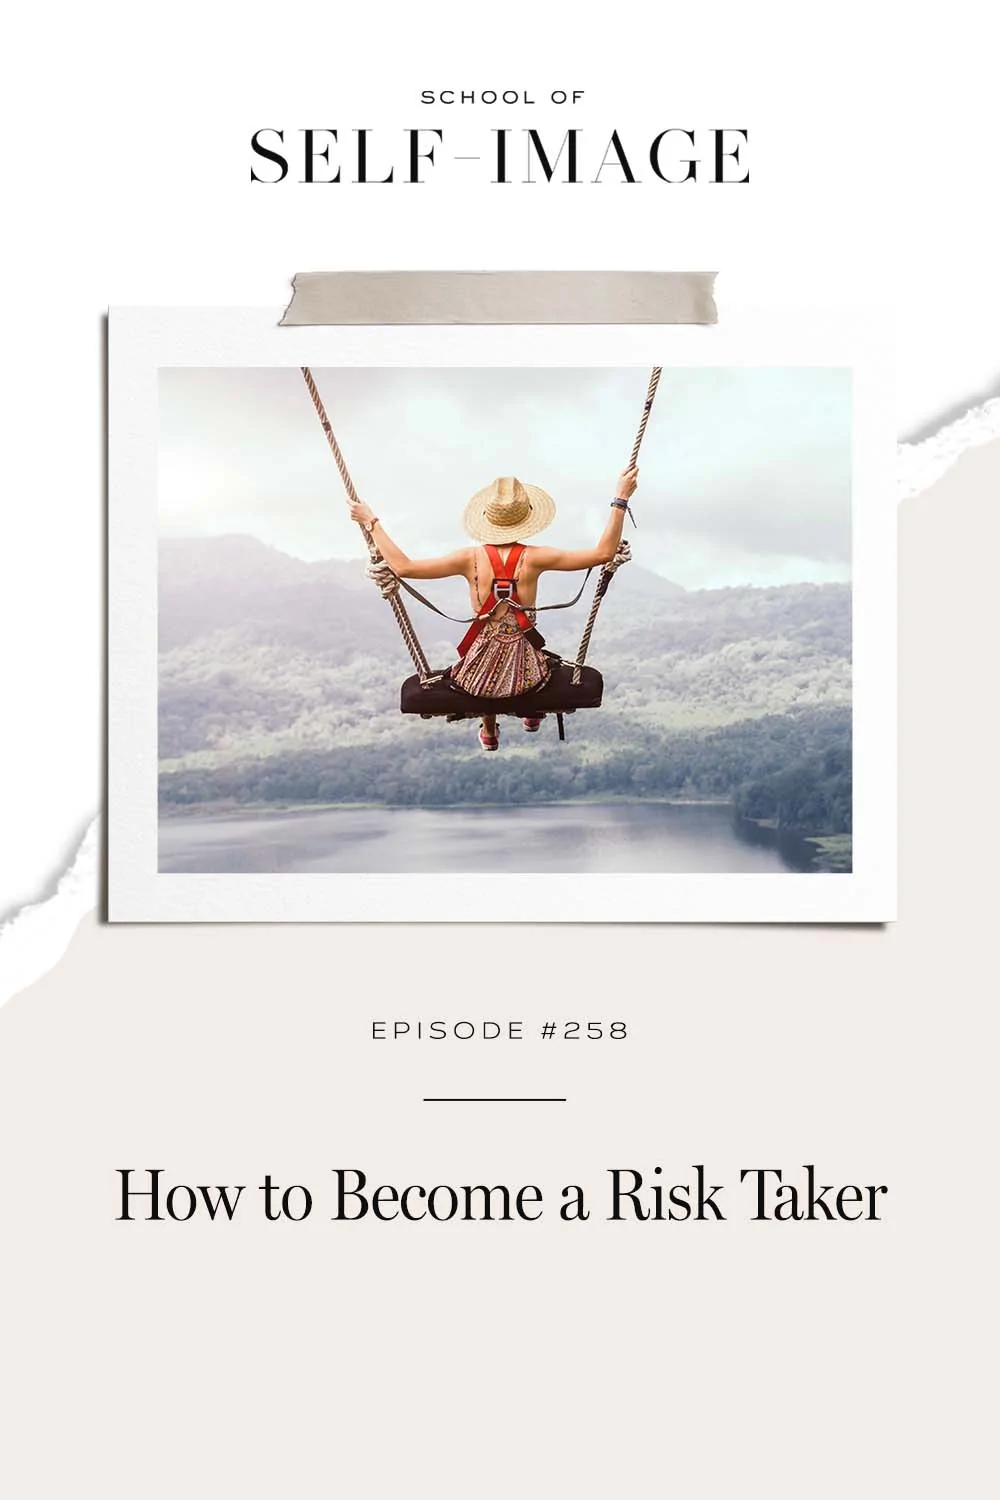 How to develop the courage to start taking risks.